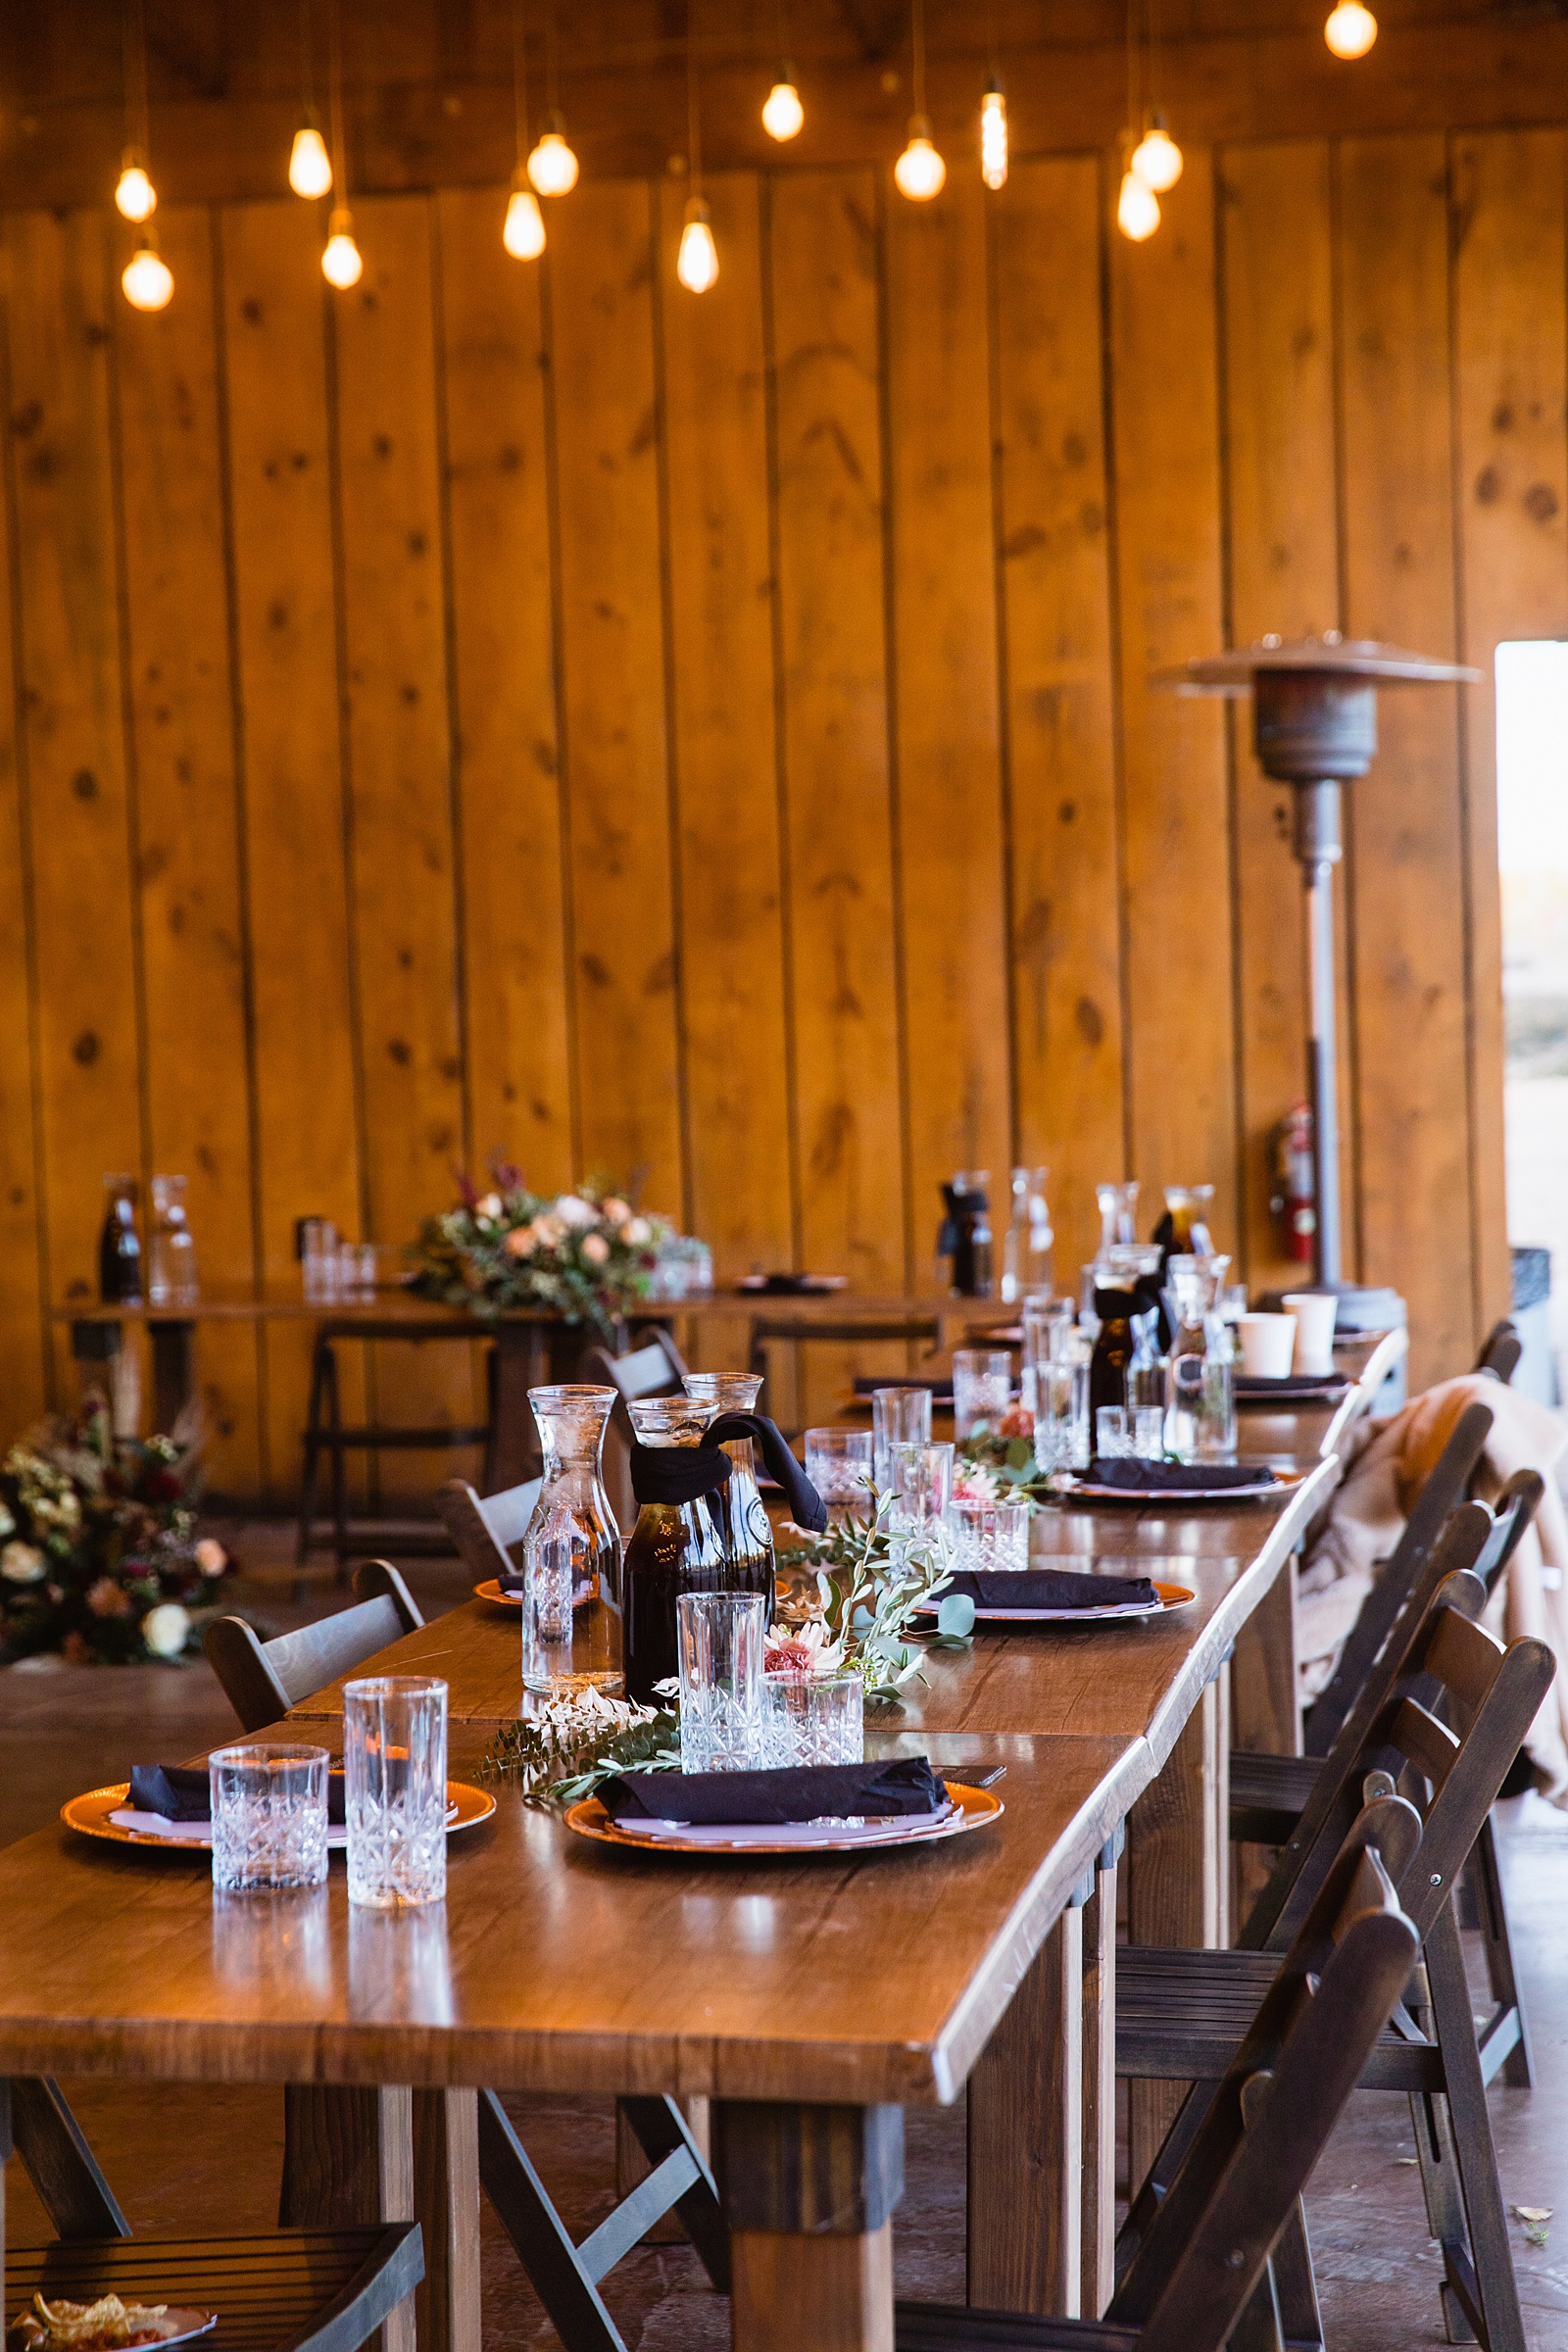 Tablescape and reception decorations at Mortimer Farms wedding reception by Prescott wedding photographer PMA Photography.